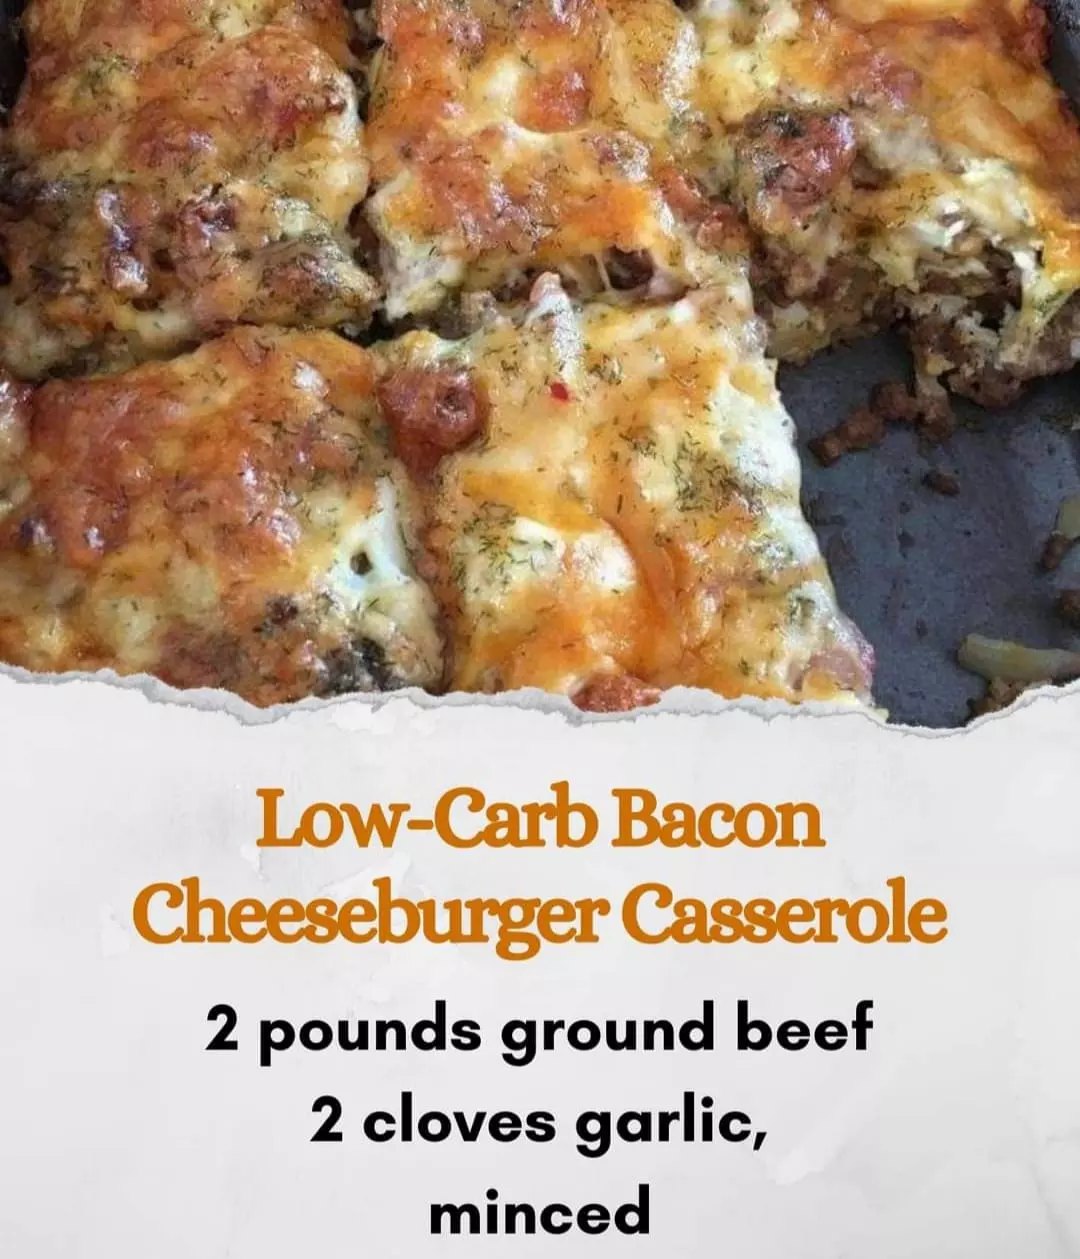 LOW-CARB BACON CHEESEBURGER CASSEROLE